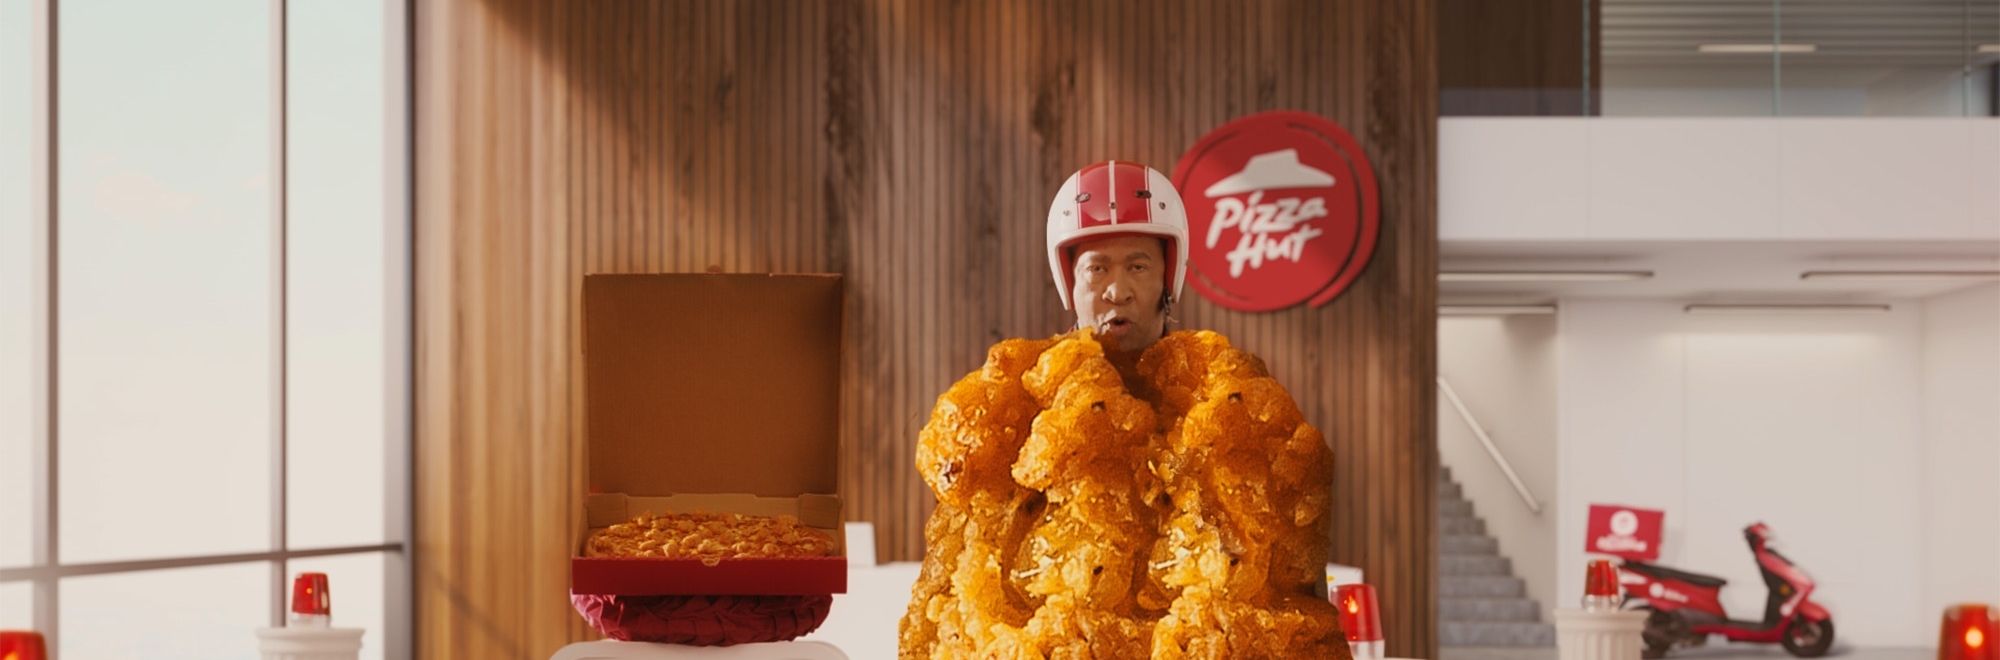 Pizza Hut and KFC come together in an attempt to break the internet